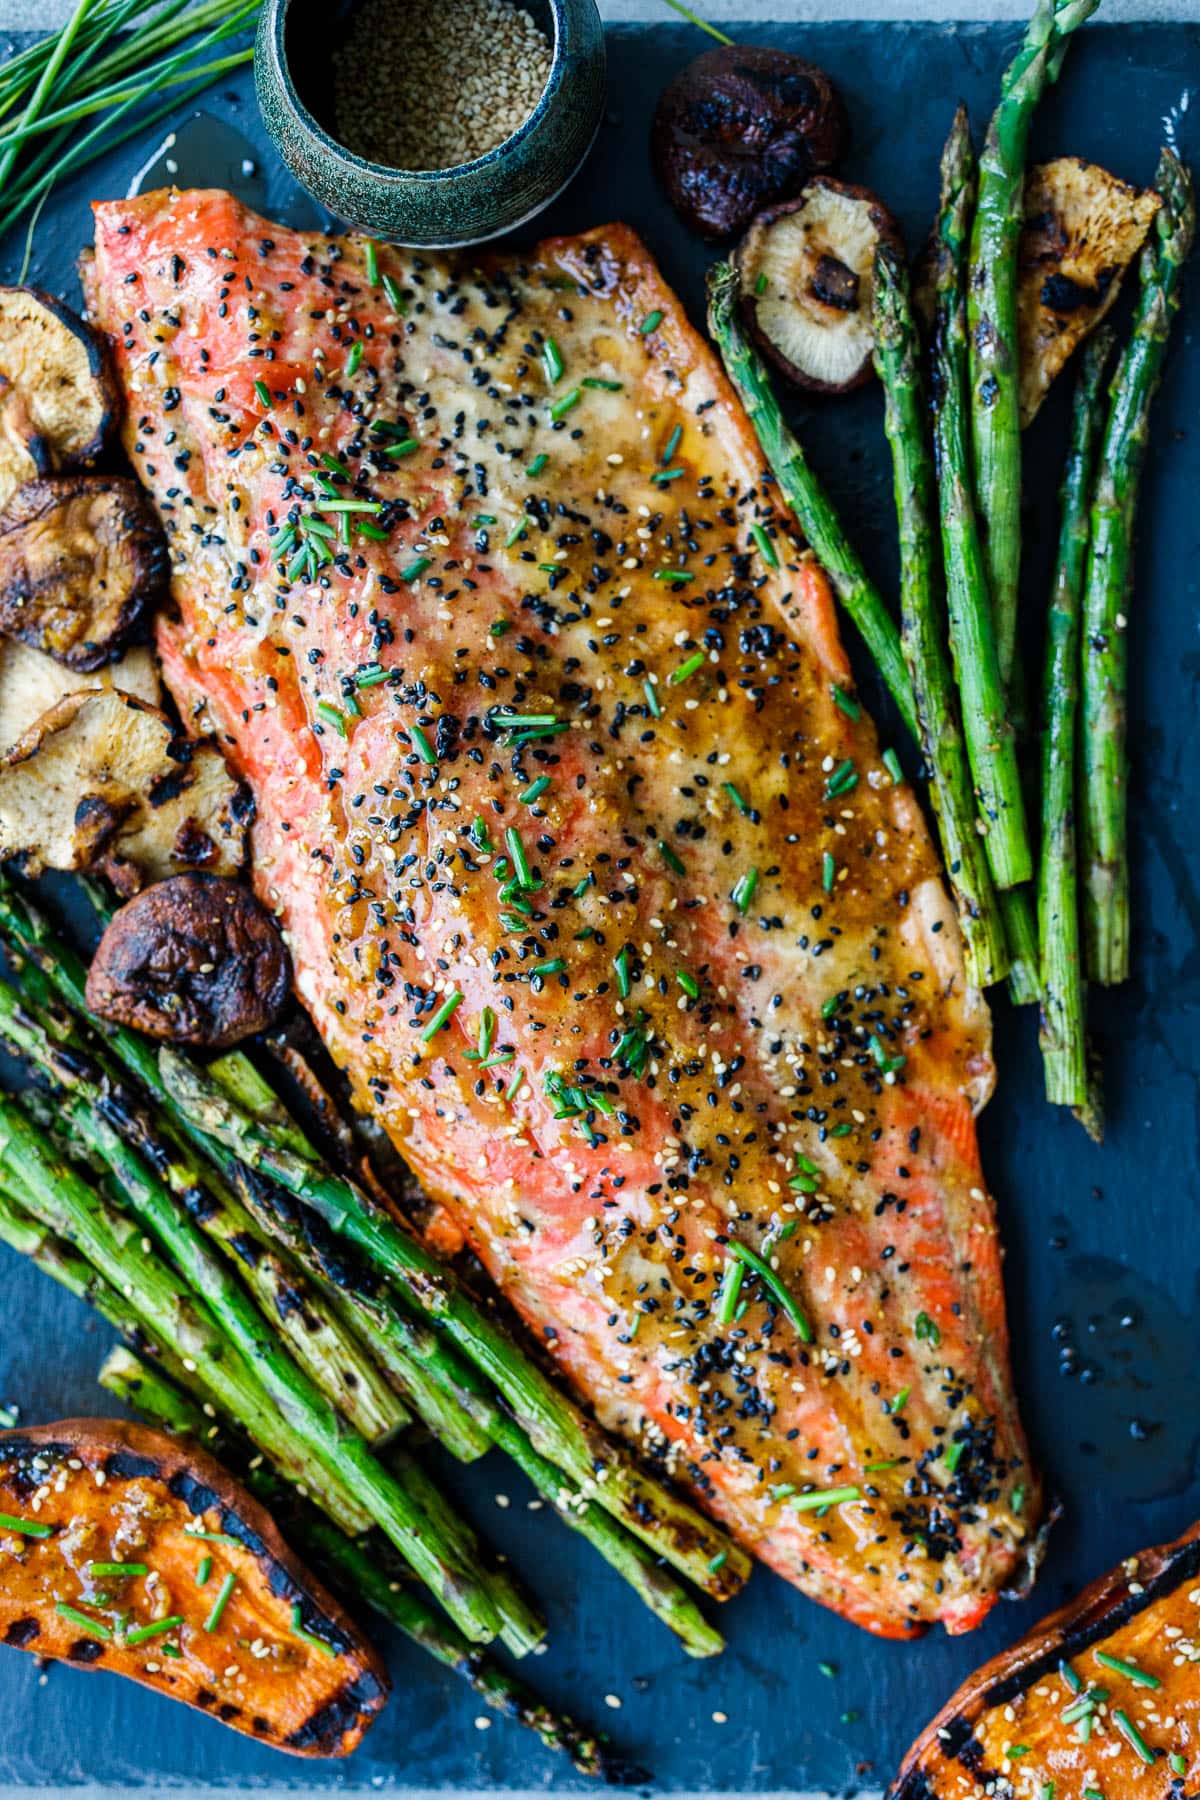 Perfect Grilled Salmon: Grilled Salmon is very simple, quick and easy and can be done in several different ways. Here's a simple guide to help you grill salmon, depending on the type, cut, marinade or seasonings.